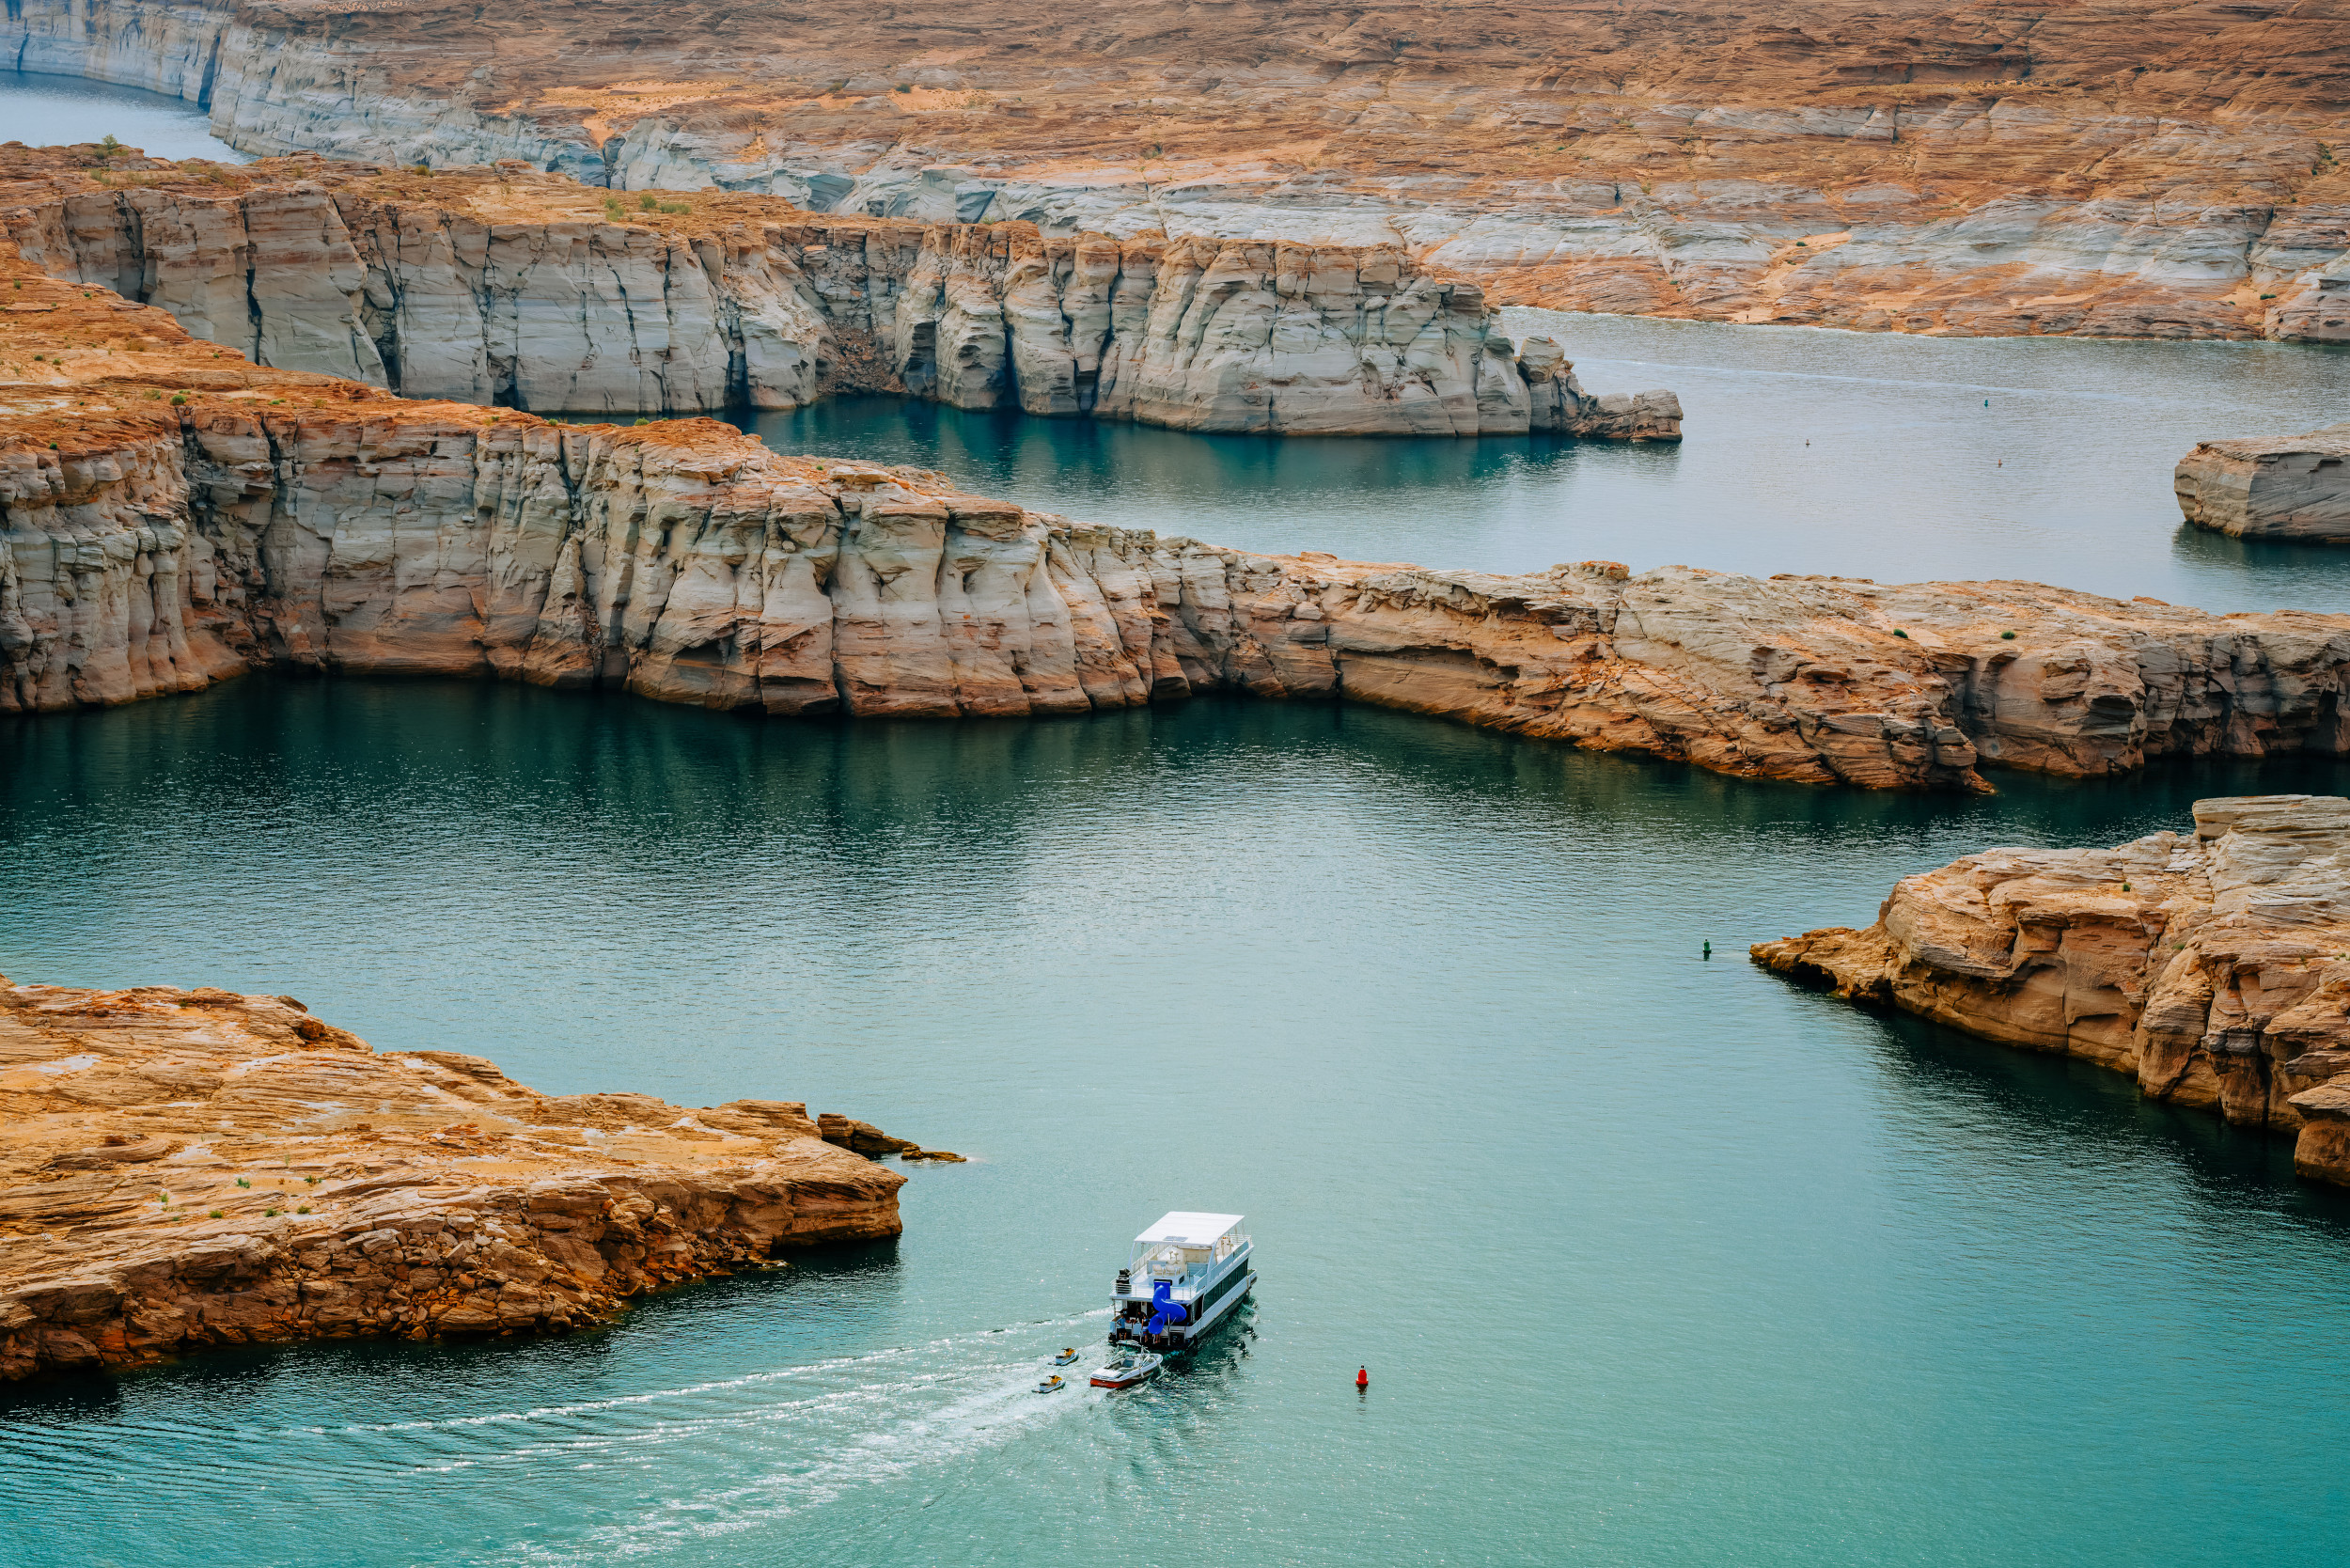 Lake Powell Water Level Projections Revealed in Report